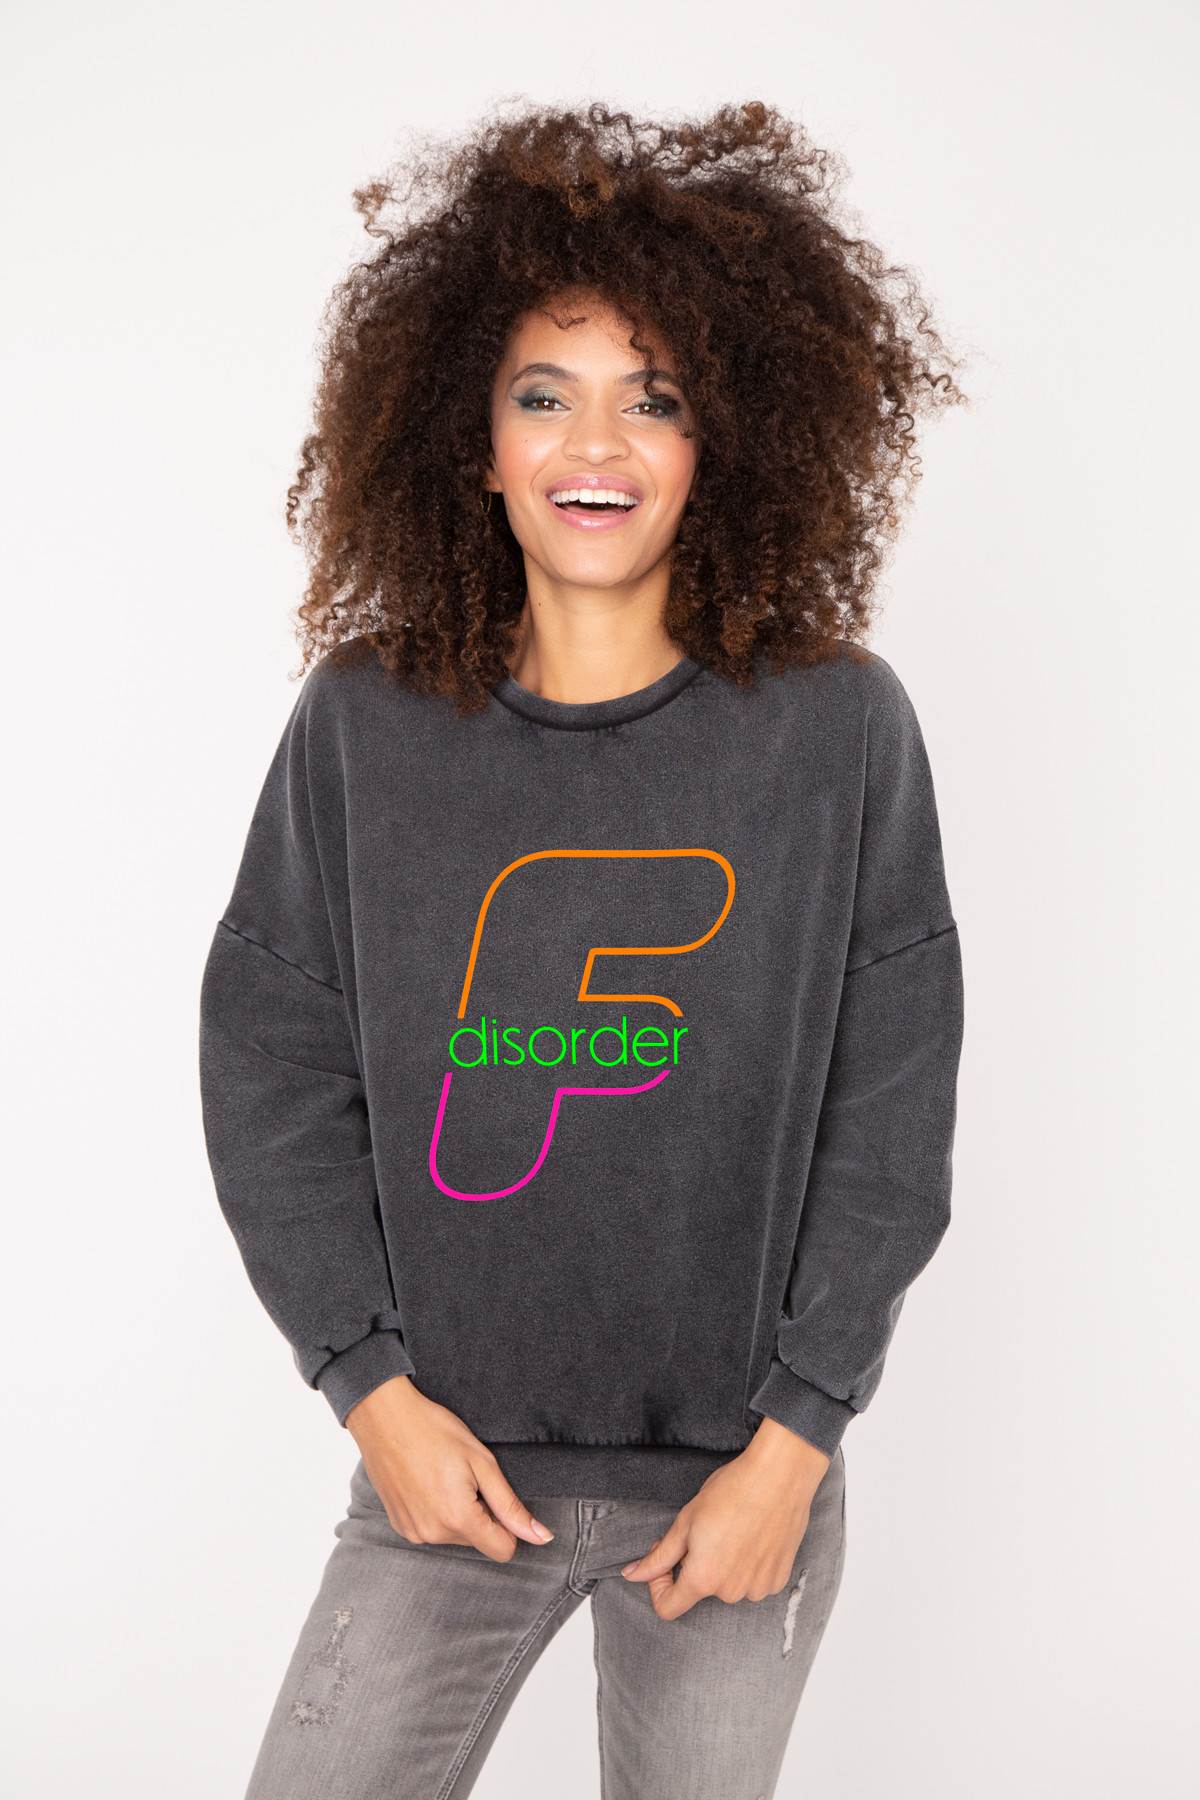 Photo de SOLDES FEMME Sweat F DISORDER chez French Disorder